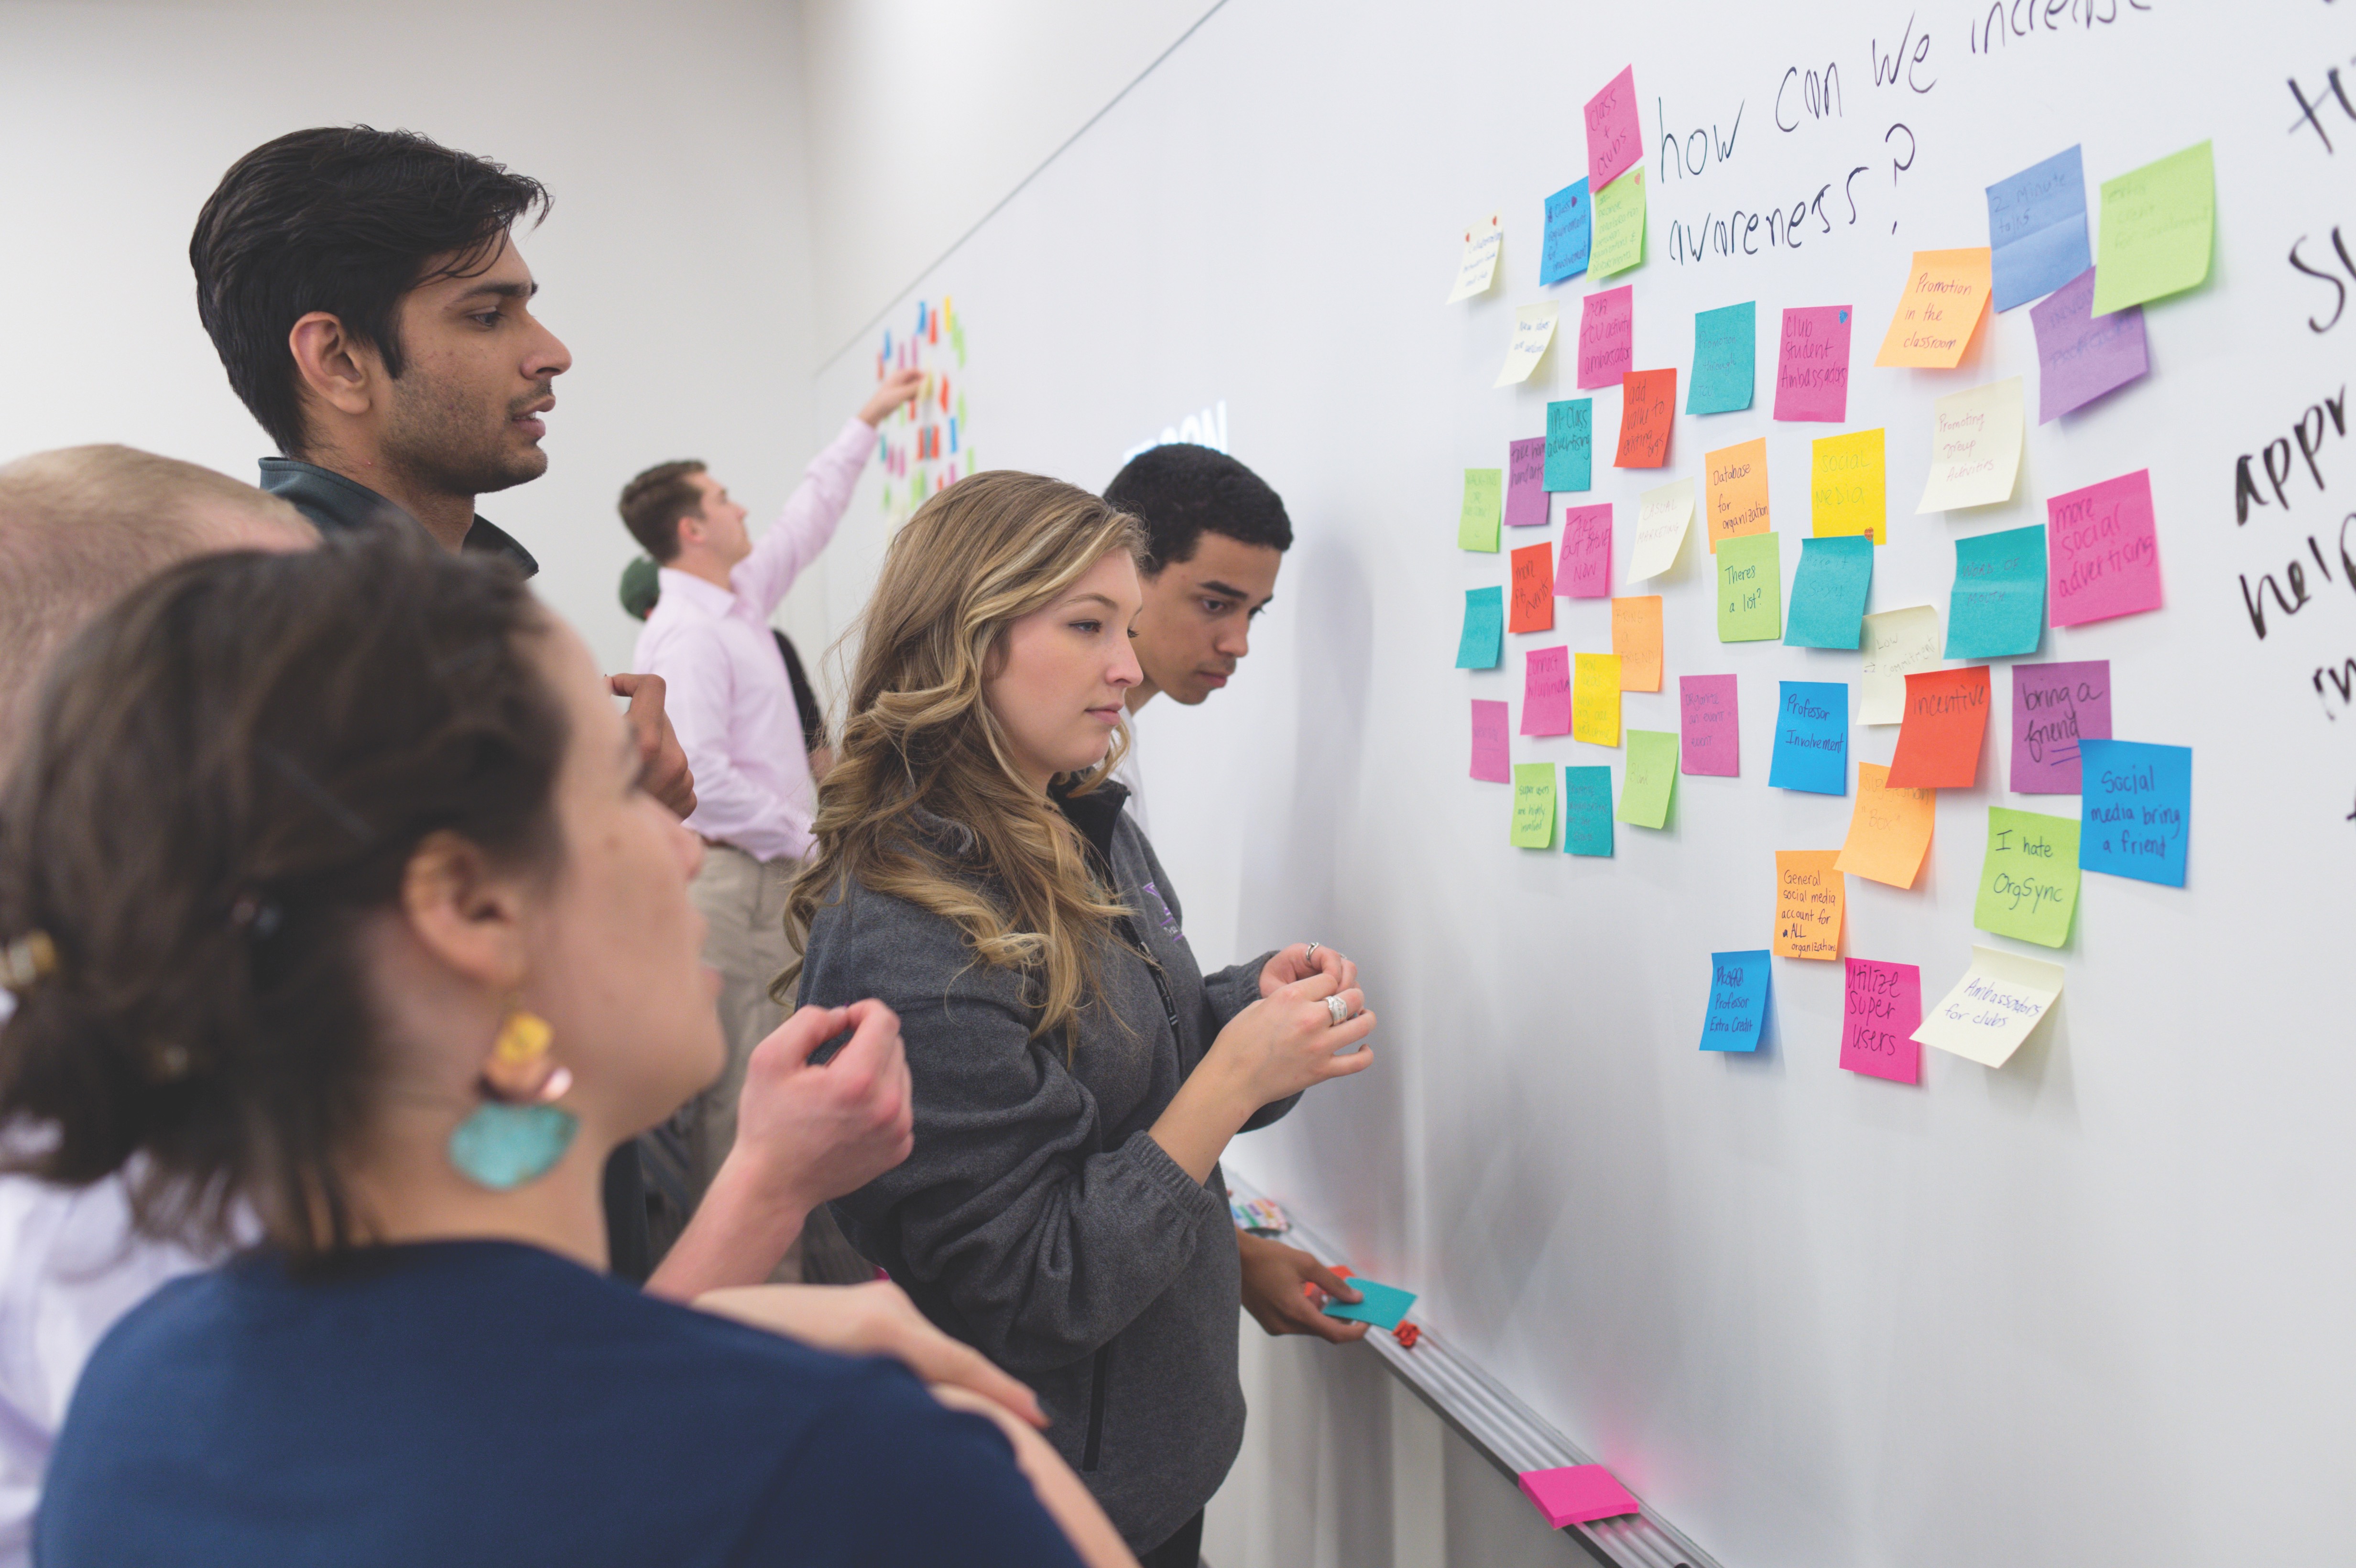 Students use Post-It notes to brainstorm ideas. Photo by Leo Wesson, April 27, 2016